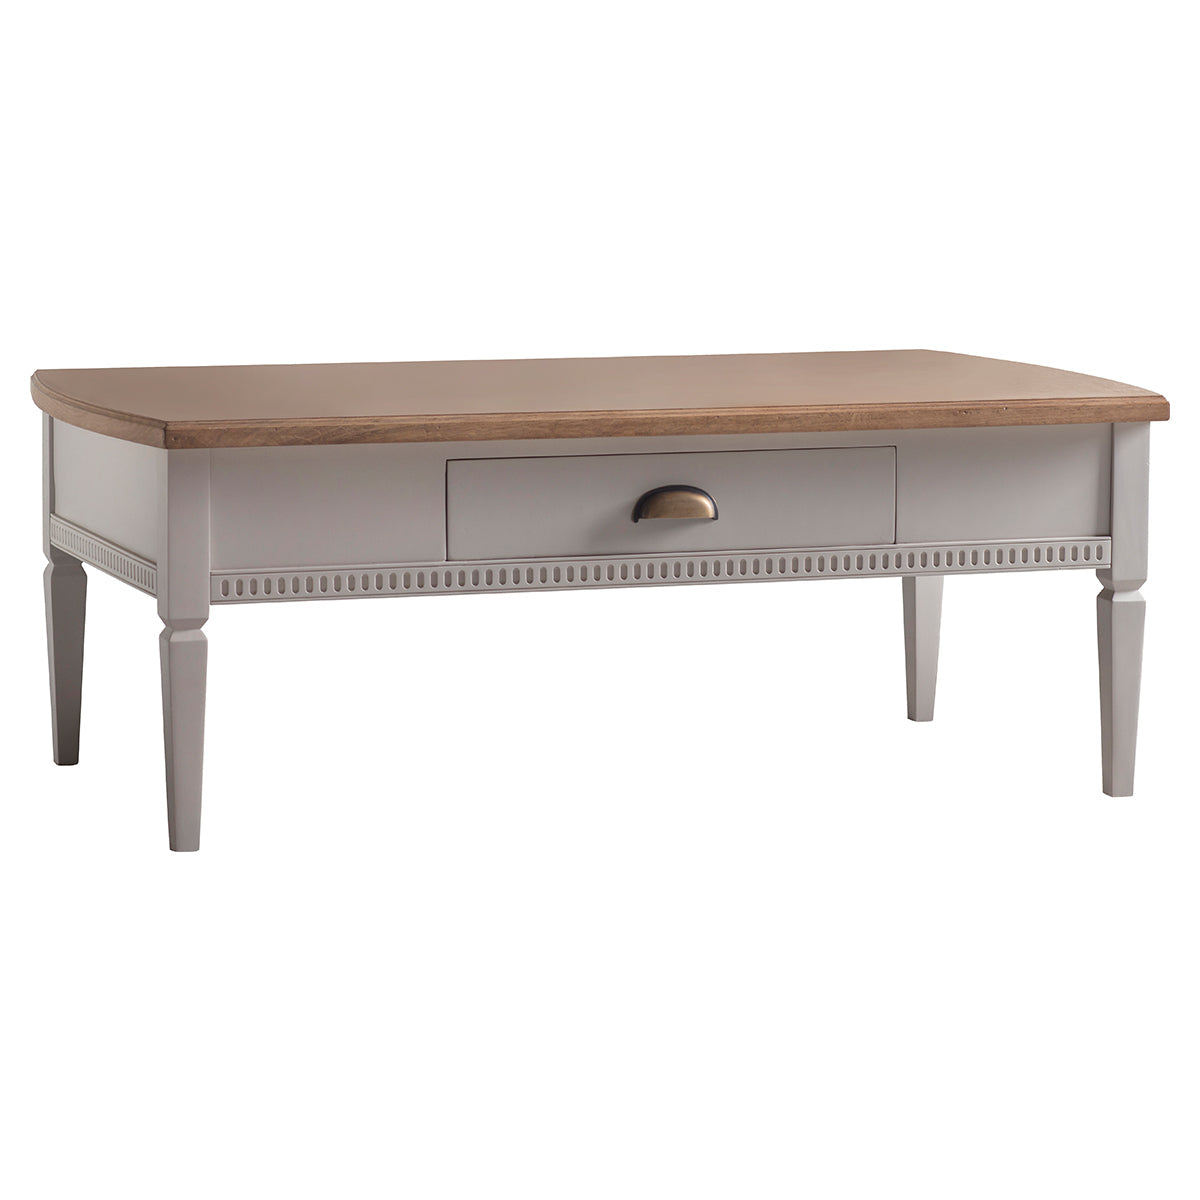 Bronte 1 Drawer Coffee Table Taupe 1200x650x450mm